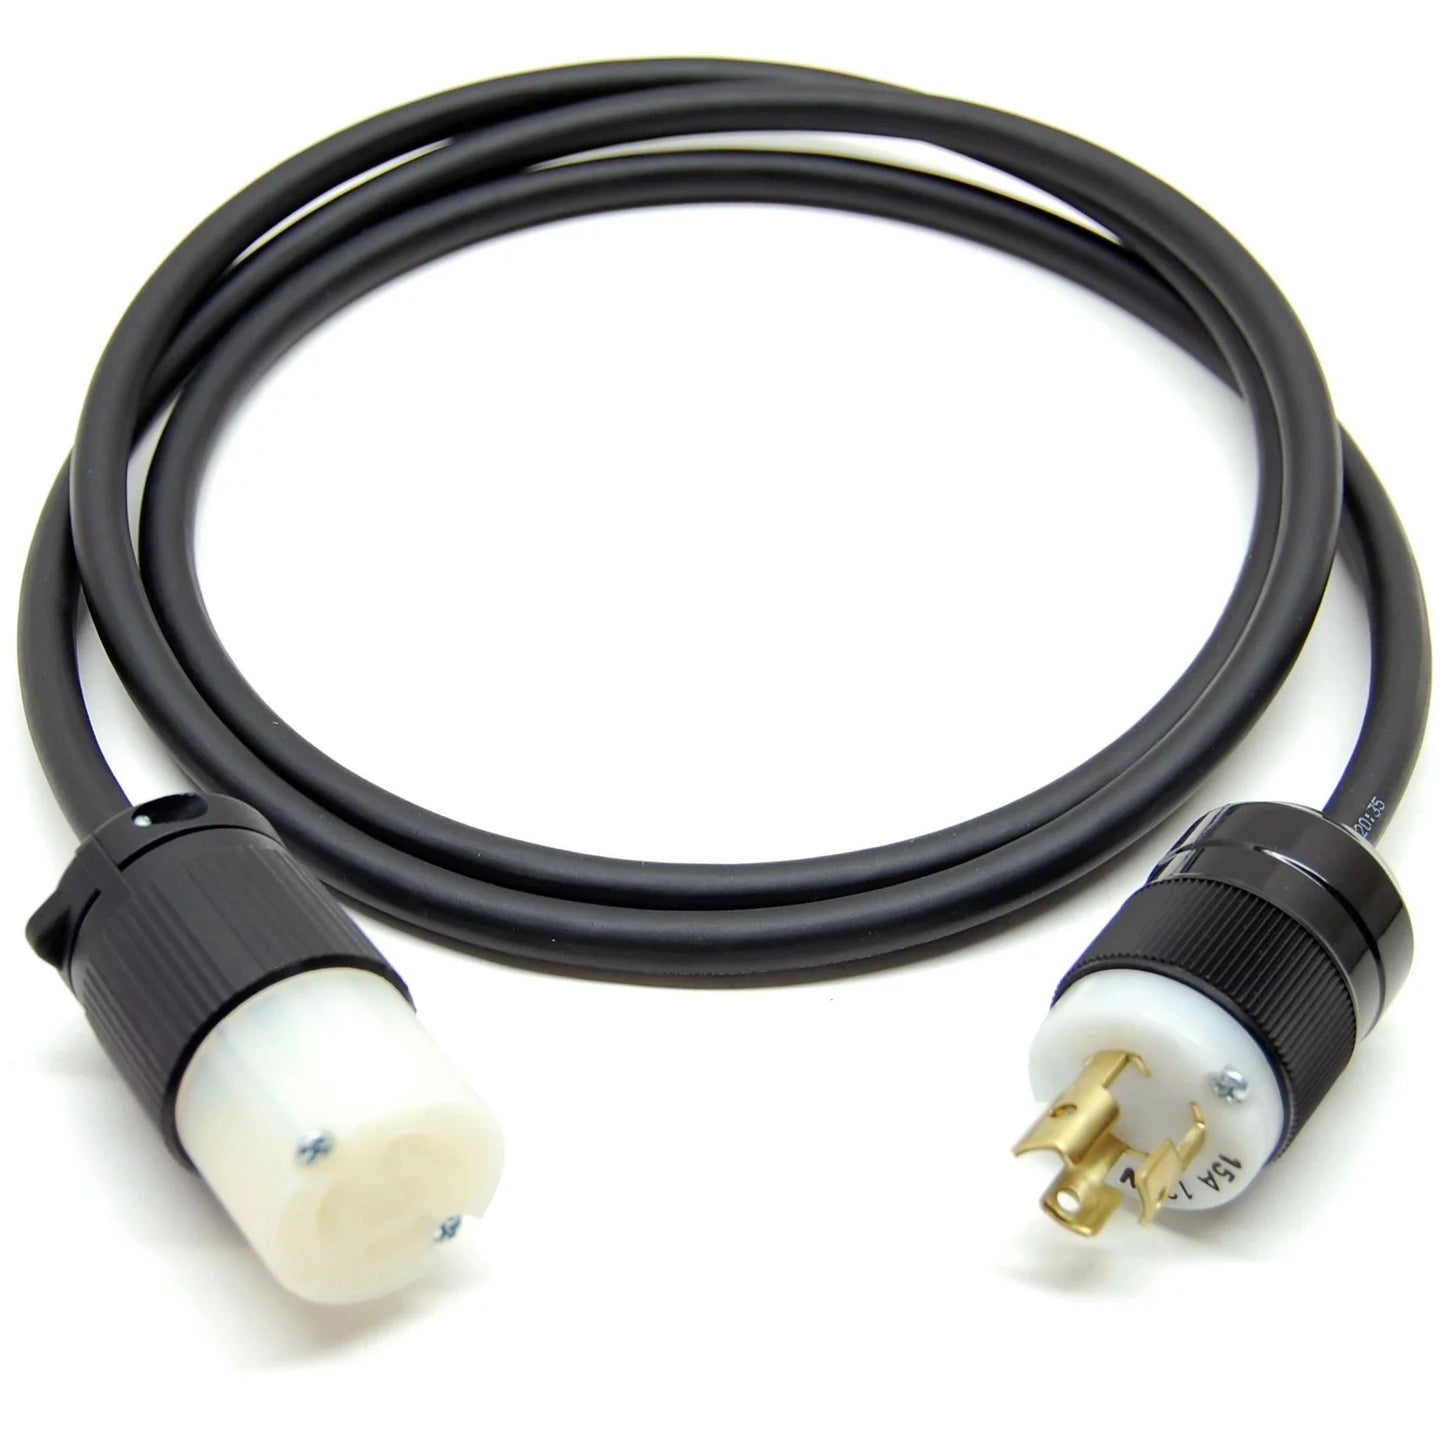 Nanolux Cord Connector with twist lock, 277v 15'